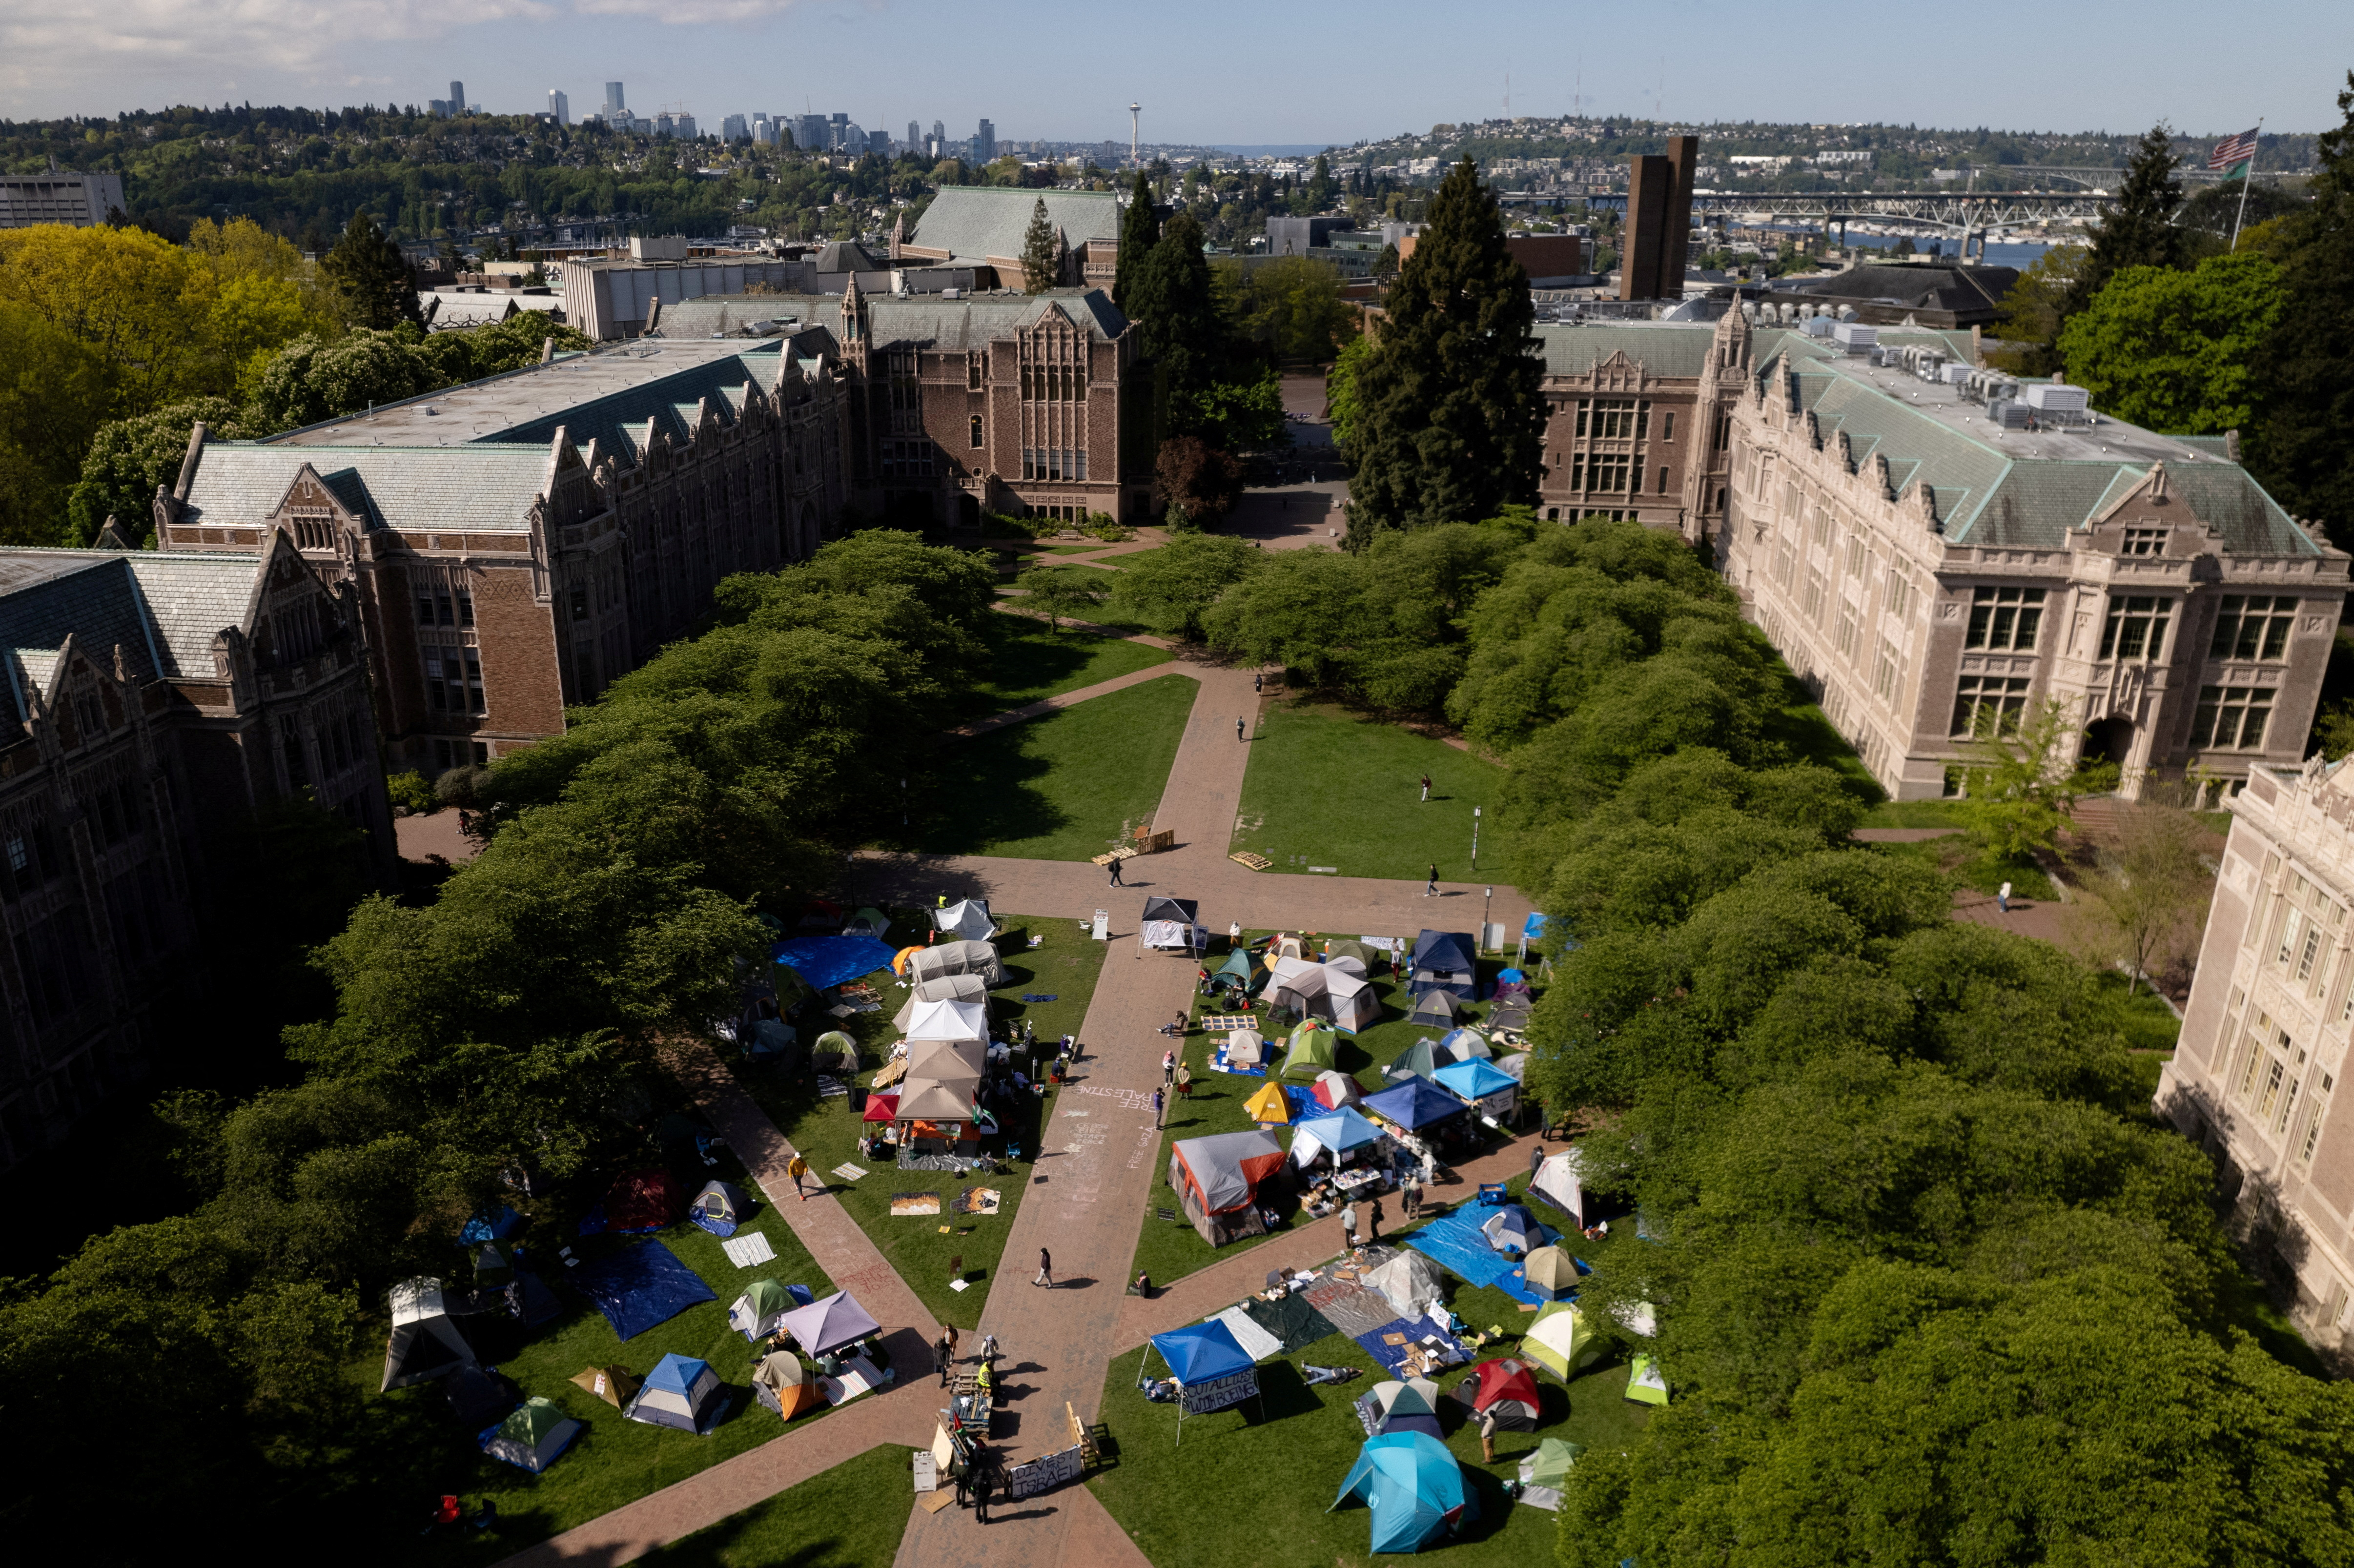 A drone view shows demonstrators at a protest encampment in support of Palestinians, at the University of Washington in Seattle